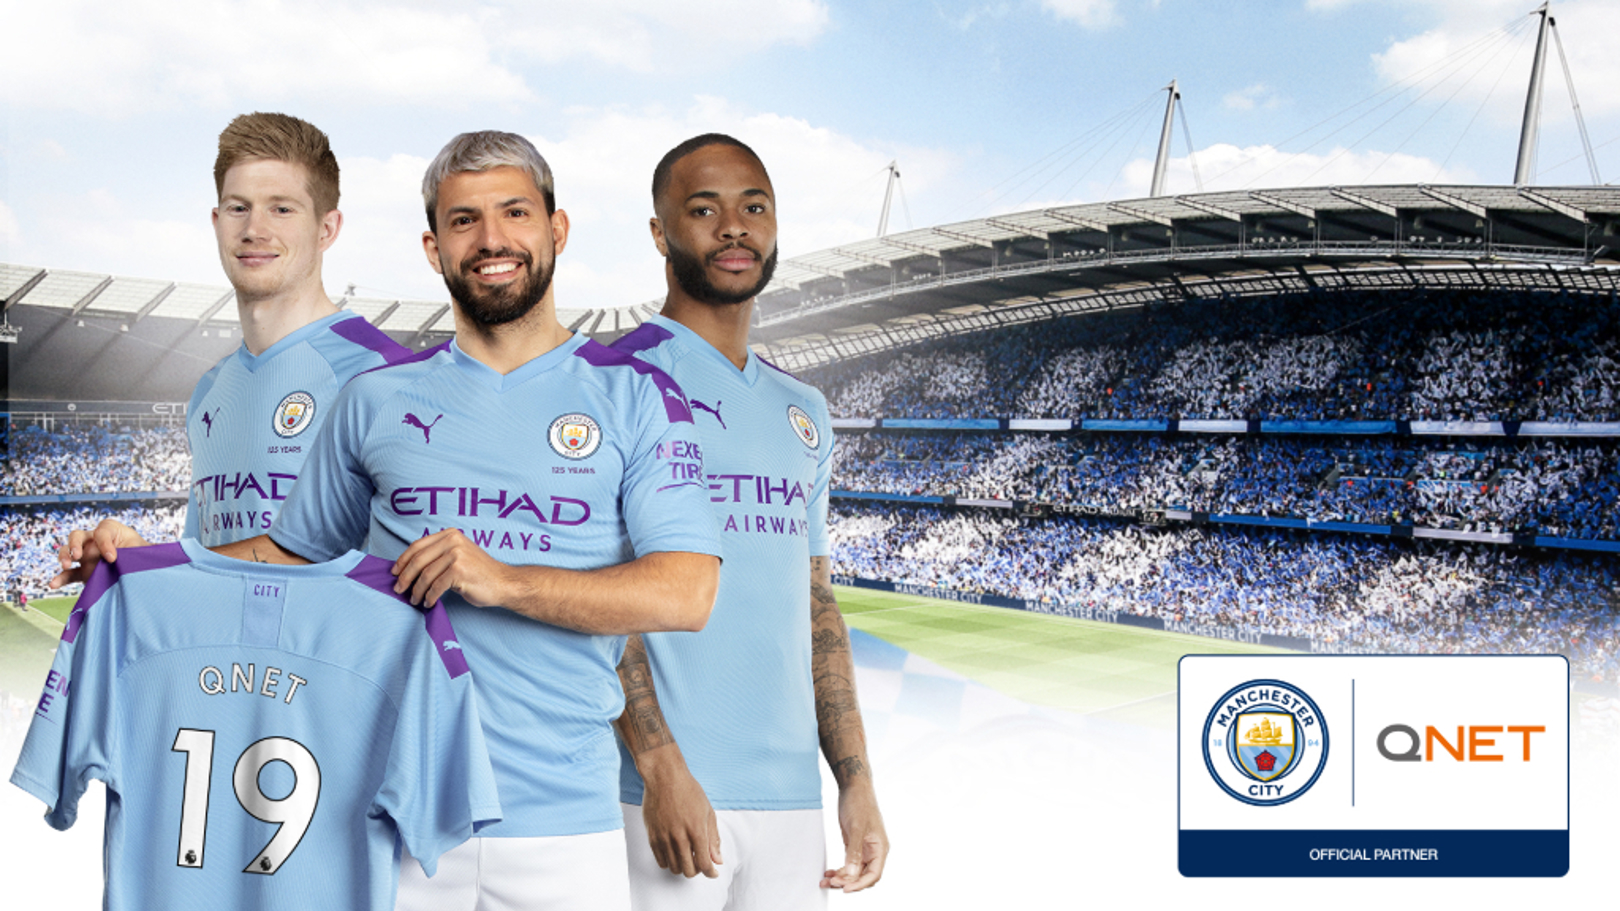 CLUB NEWS: Manchester City has extended its partnership with Asian Direct Selling company QNET that will take the relationship to ten years. 